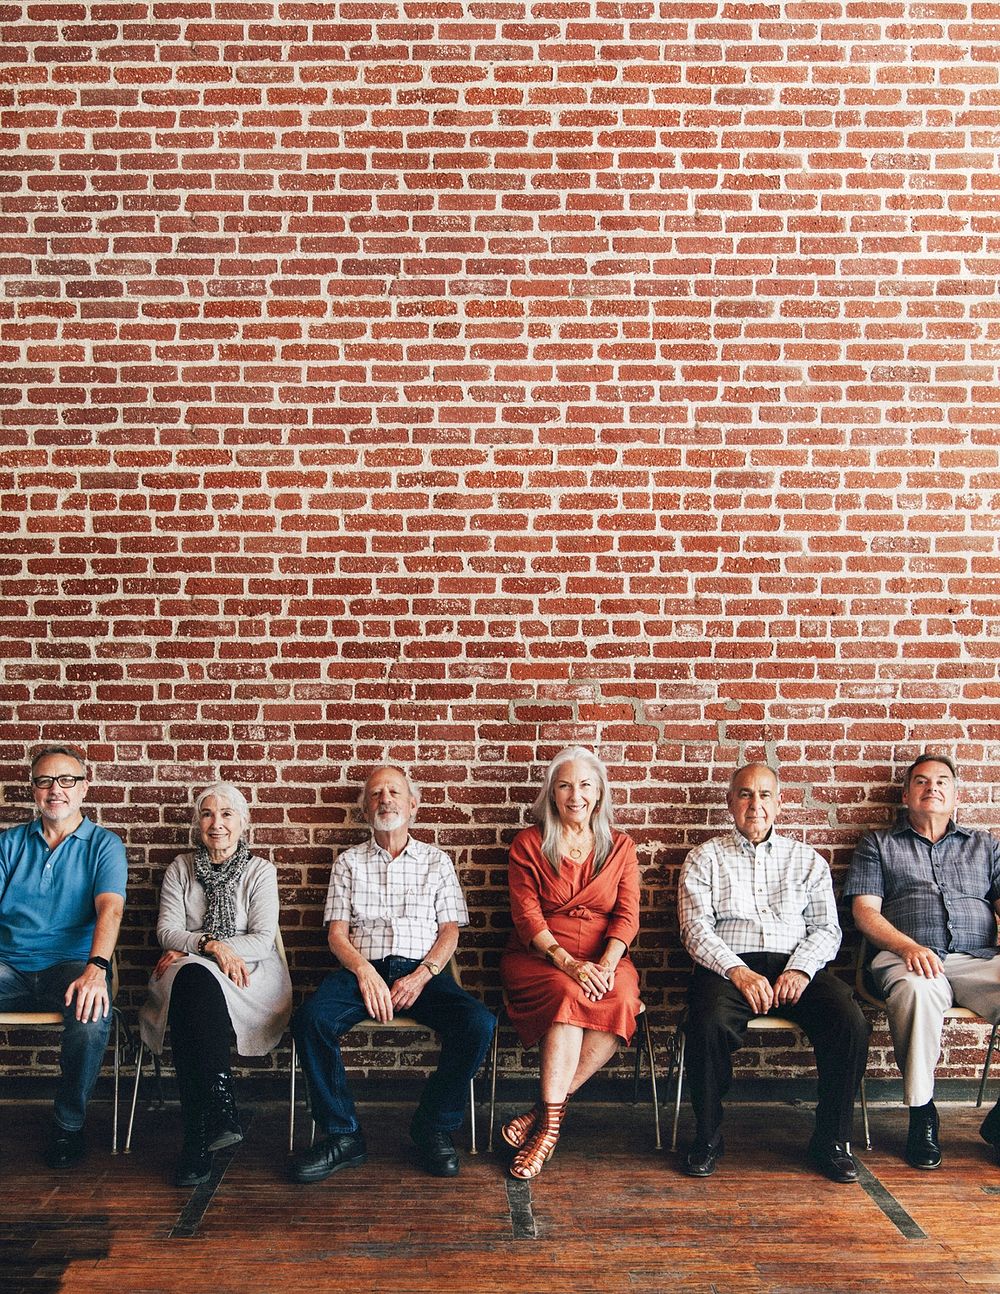 Diverse elderly people sitting in a row against a brick wall background